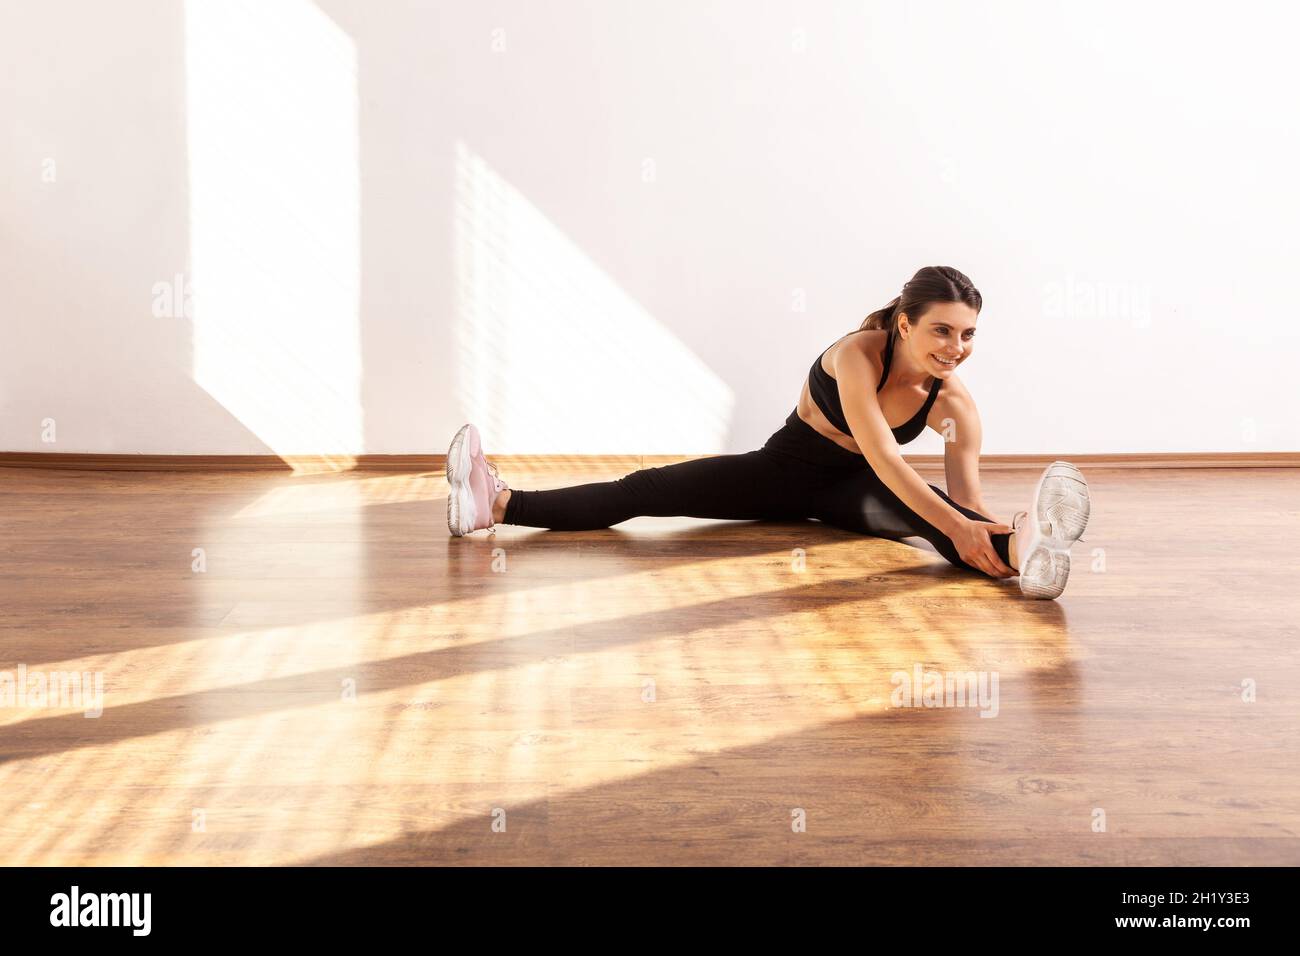 Slim gymnast woman sitting with spread legs, bending to touch feet, doing stretching muscle, wearing black sports top and tights. Full length studio shot illuminated by sunlight from window. Stock Photo